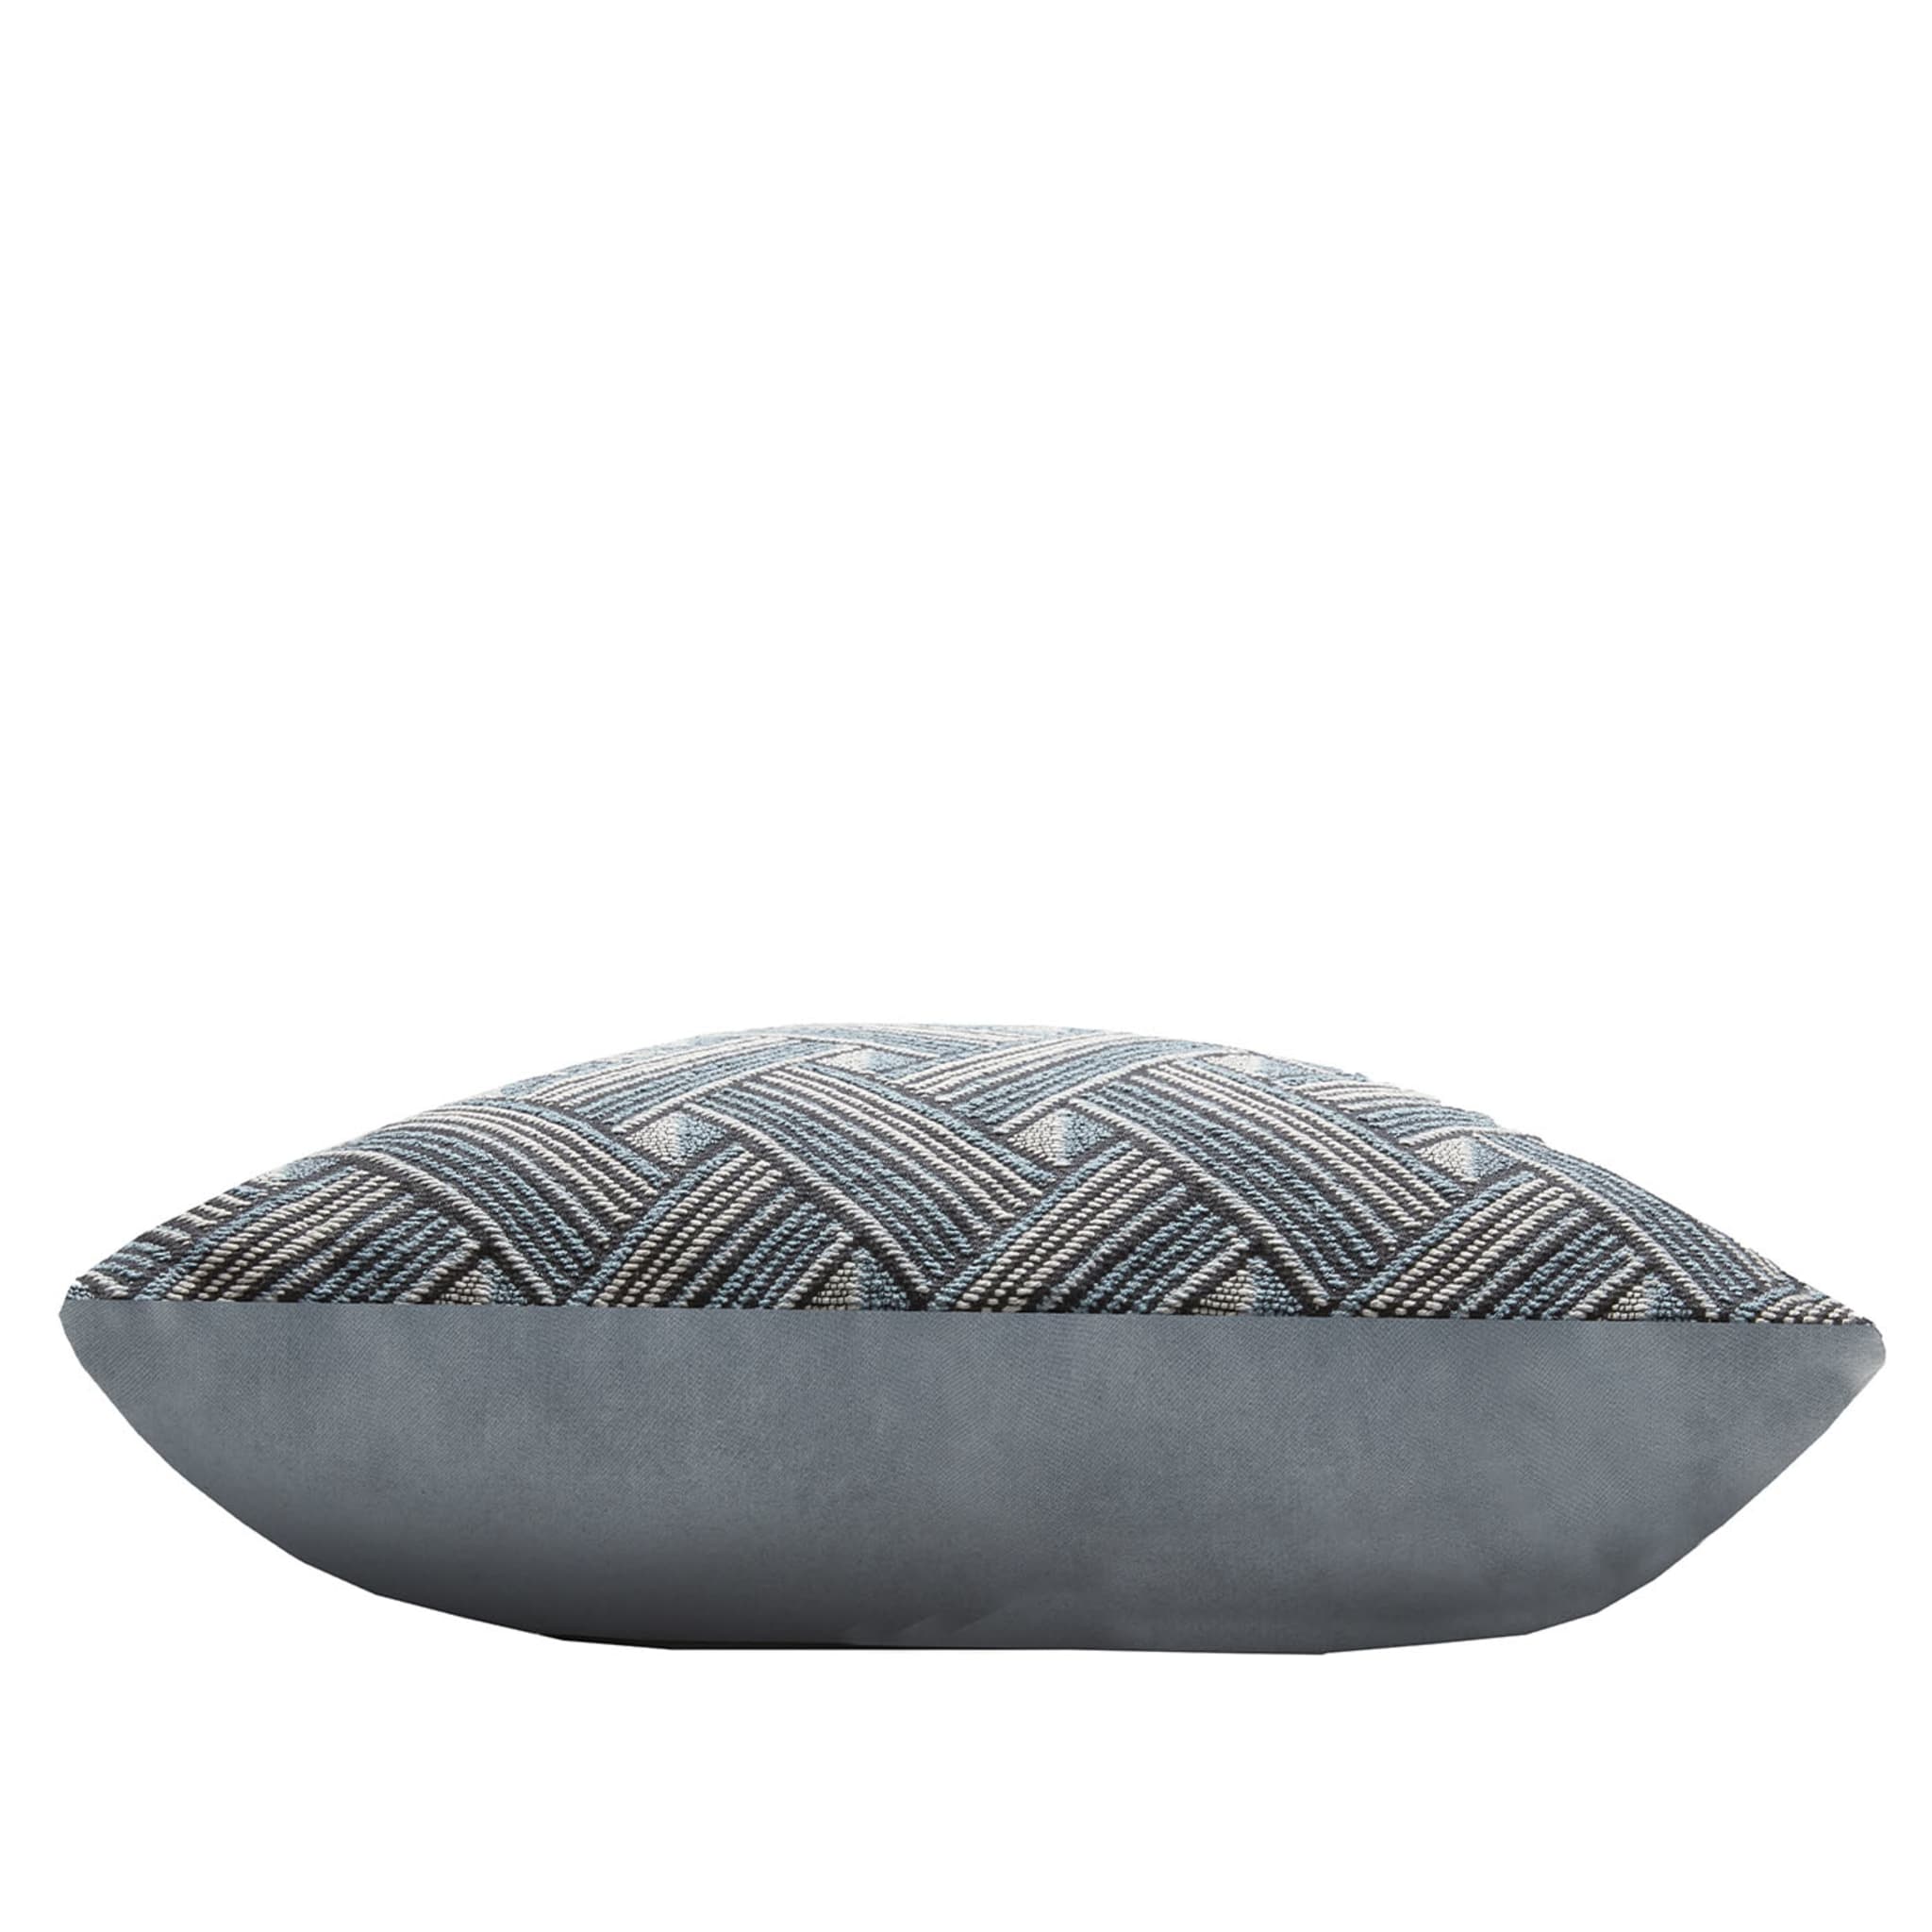 Rock Collection Teal Cushion - Alternative view 1